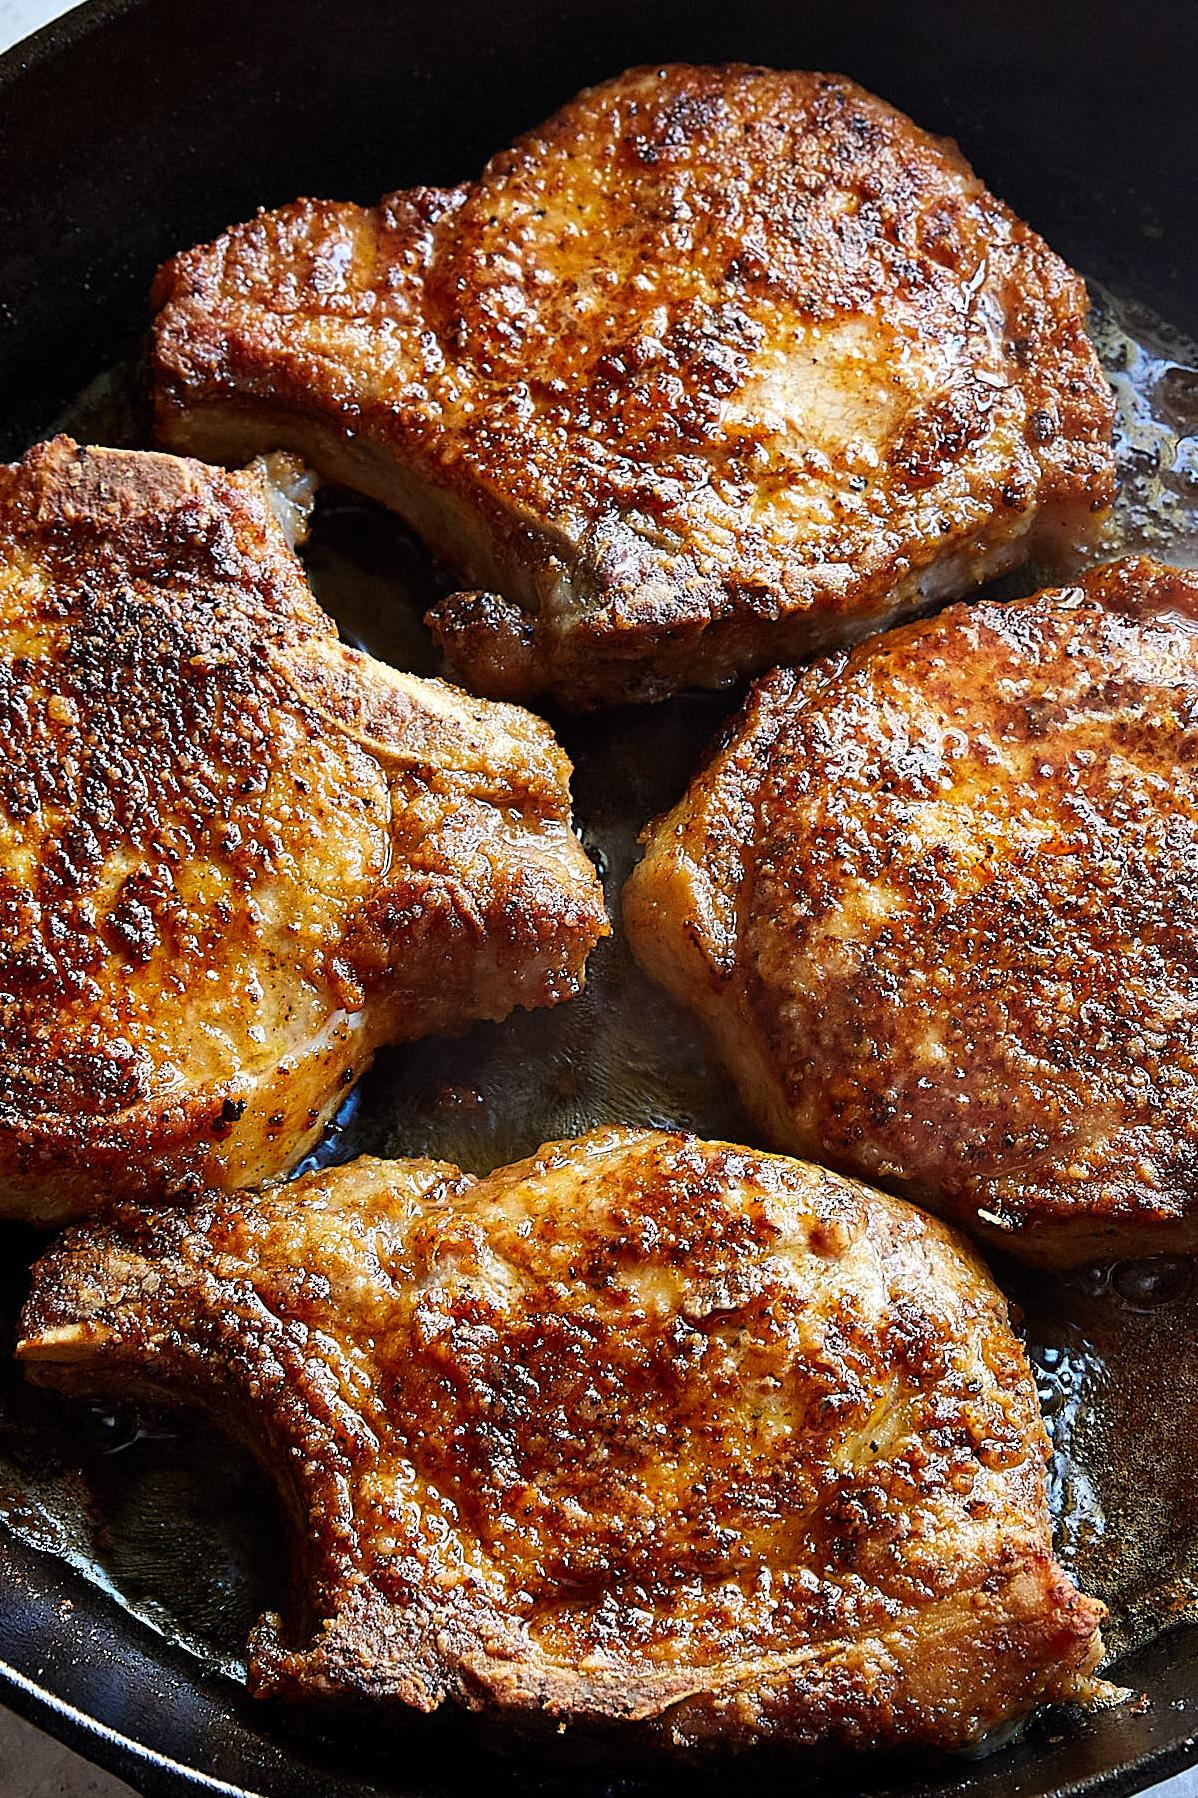  Juicy and delicious pork chops, straight from the South!